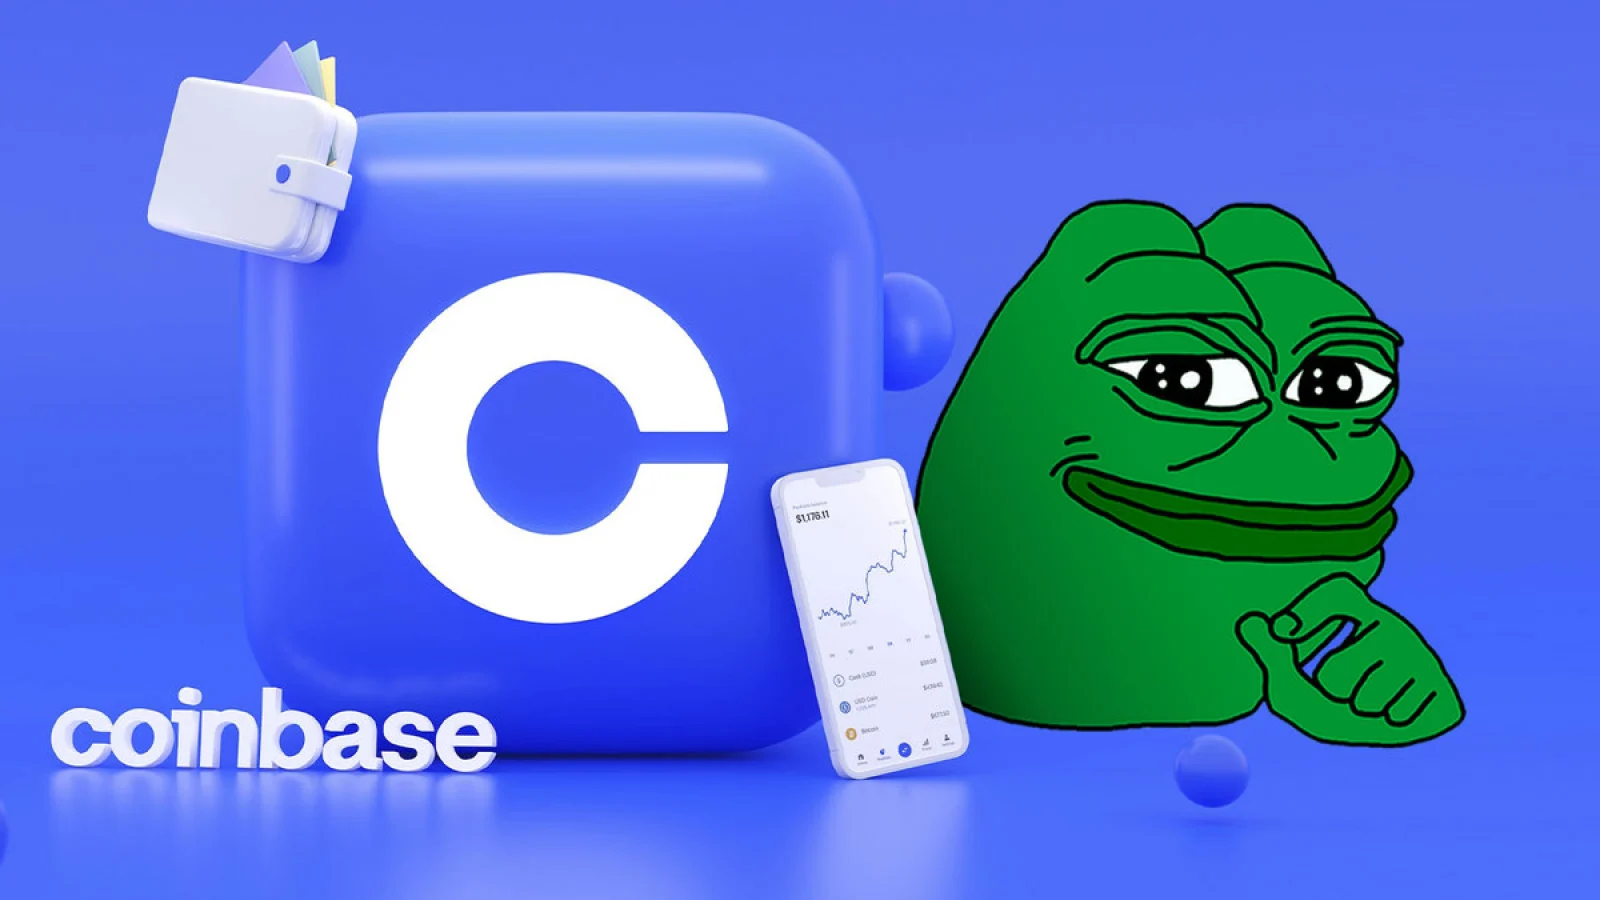 Coinbase calls Pepe a ‘hate symbol,’ prompting calls to boycott the exchange